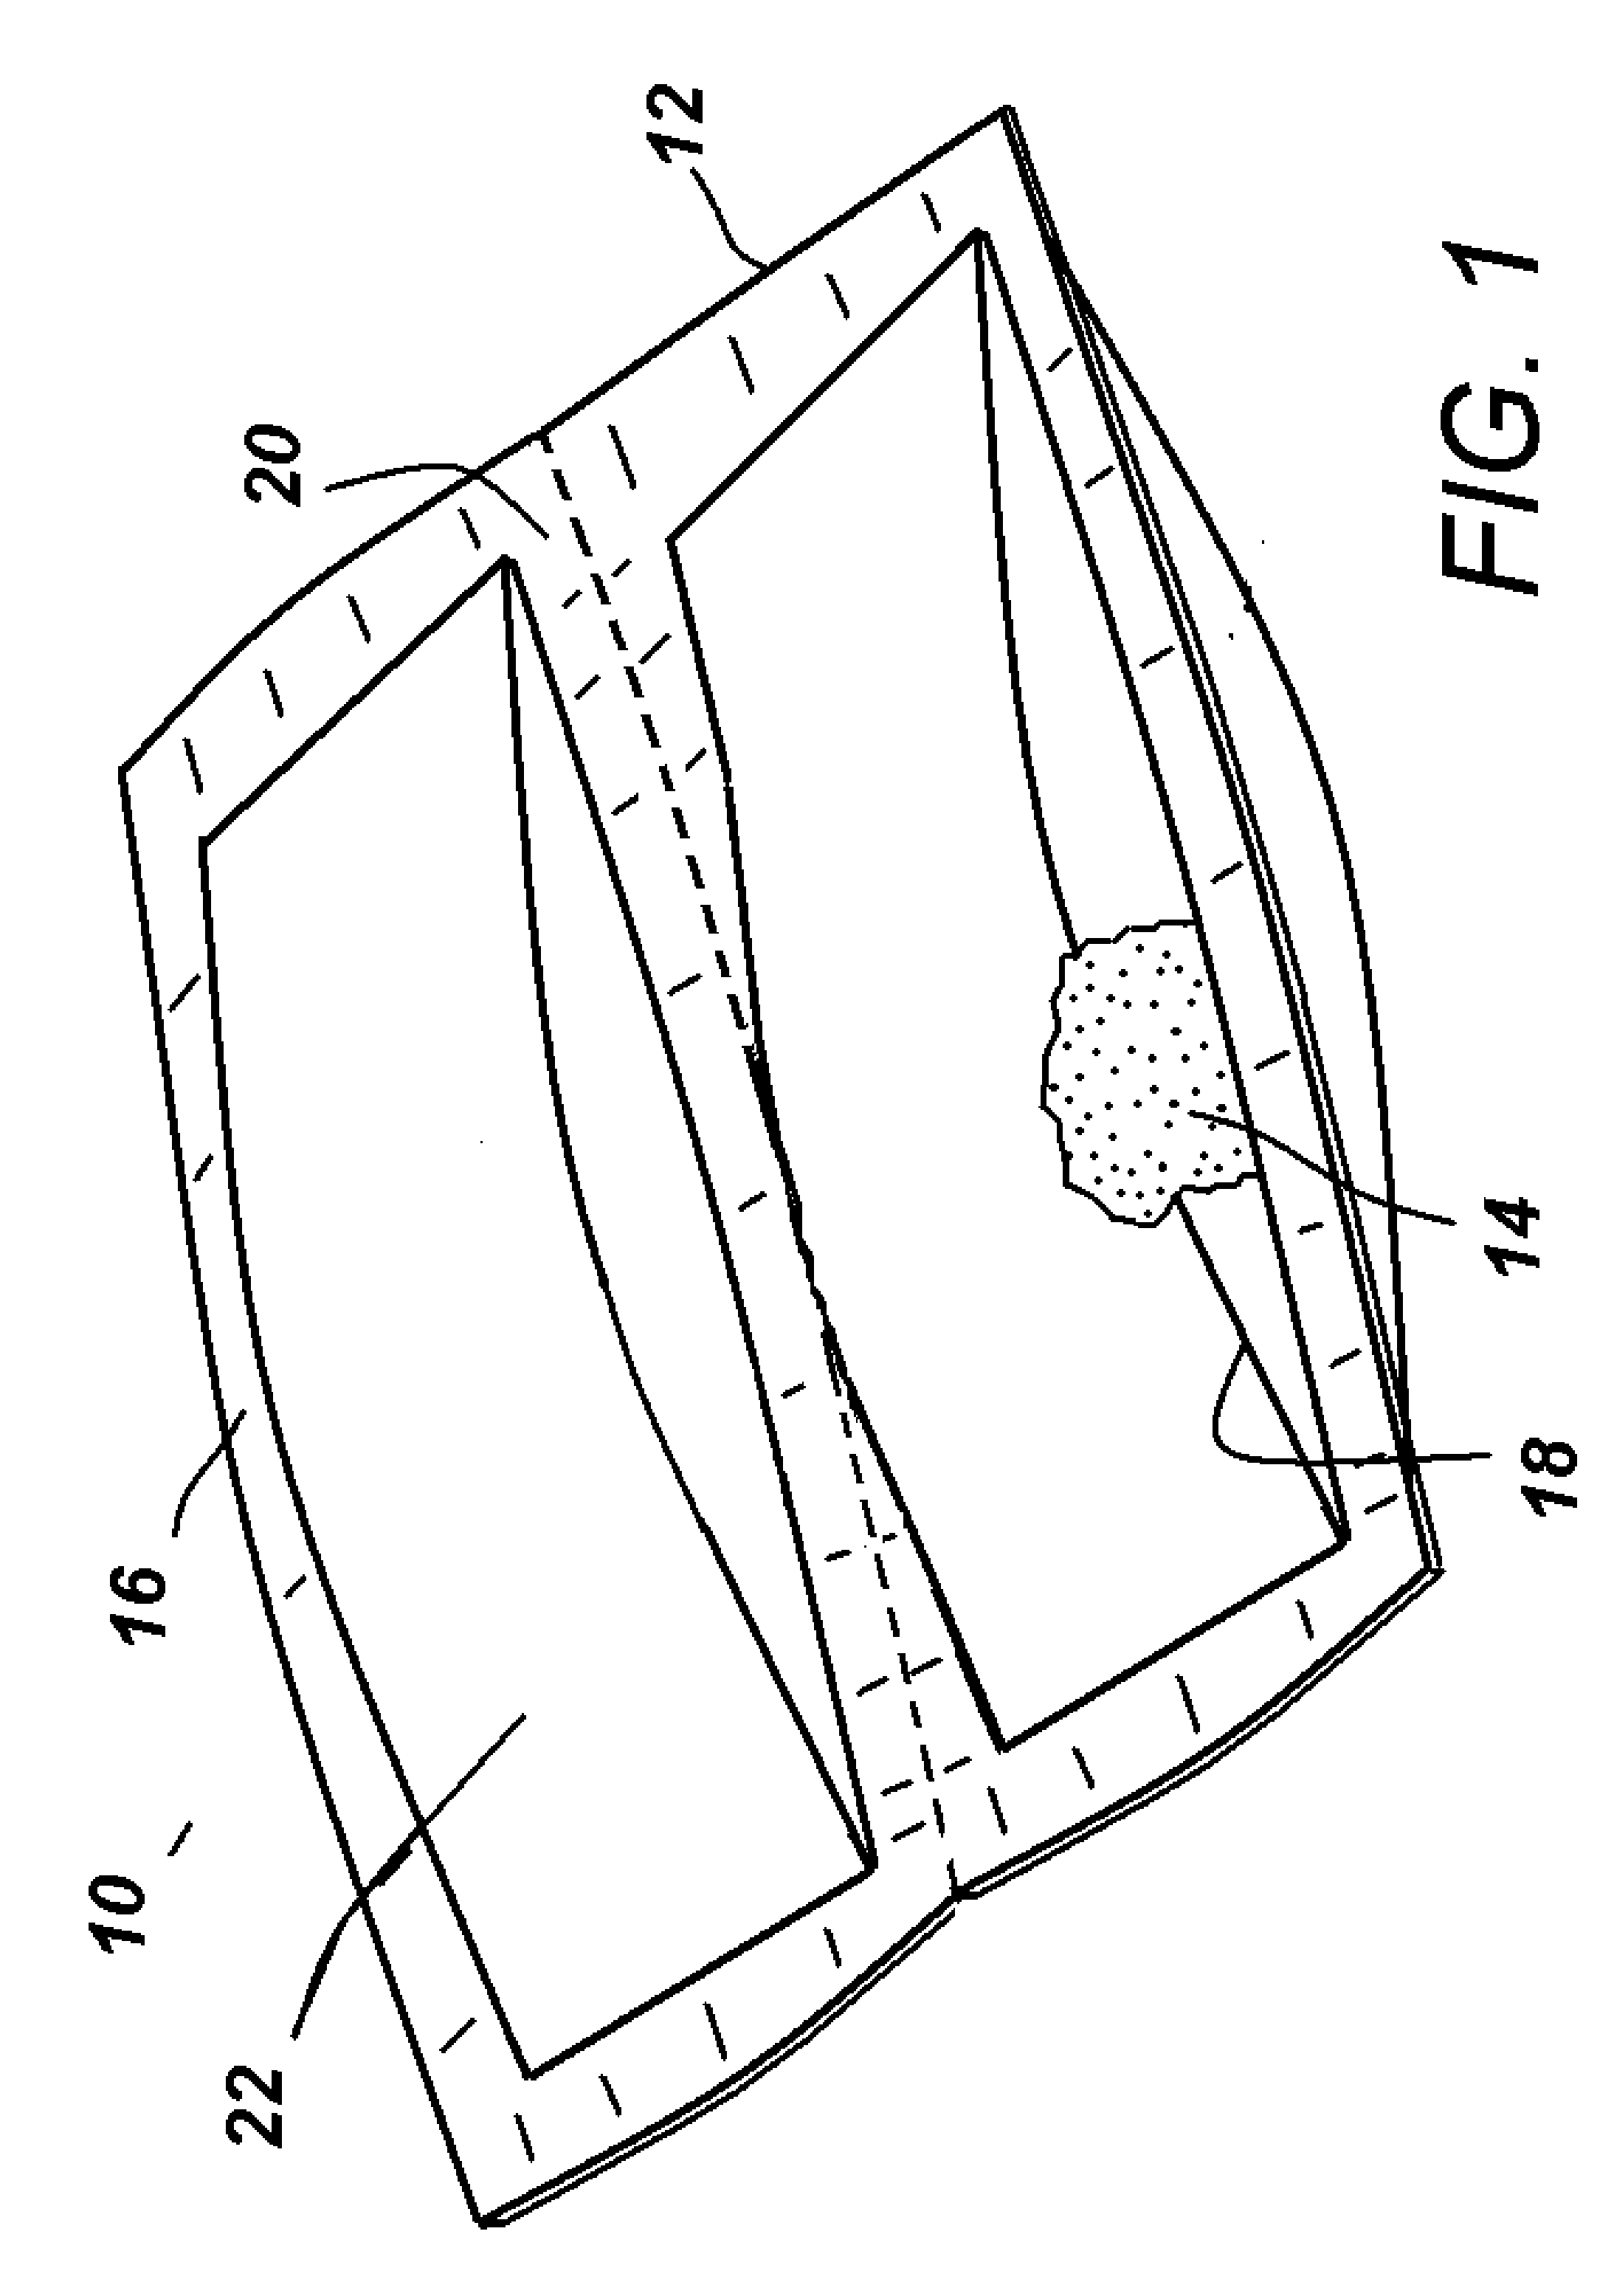 Dosing Bag Structure for Dispensing Fiber and Admixtures into Cementitious Mixtures